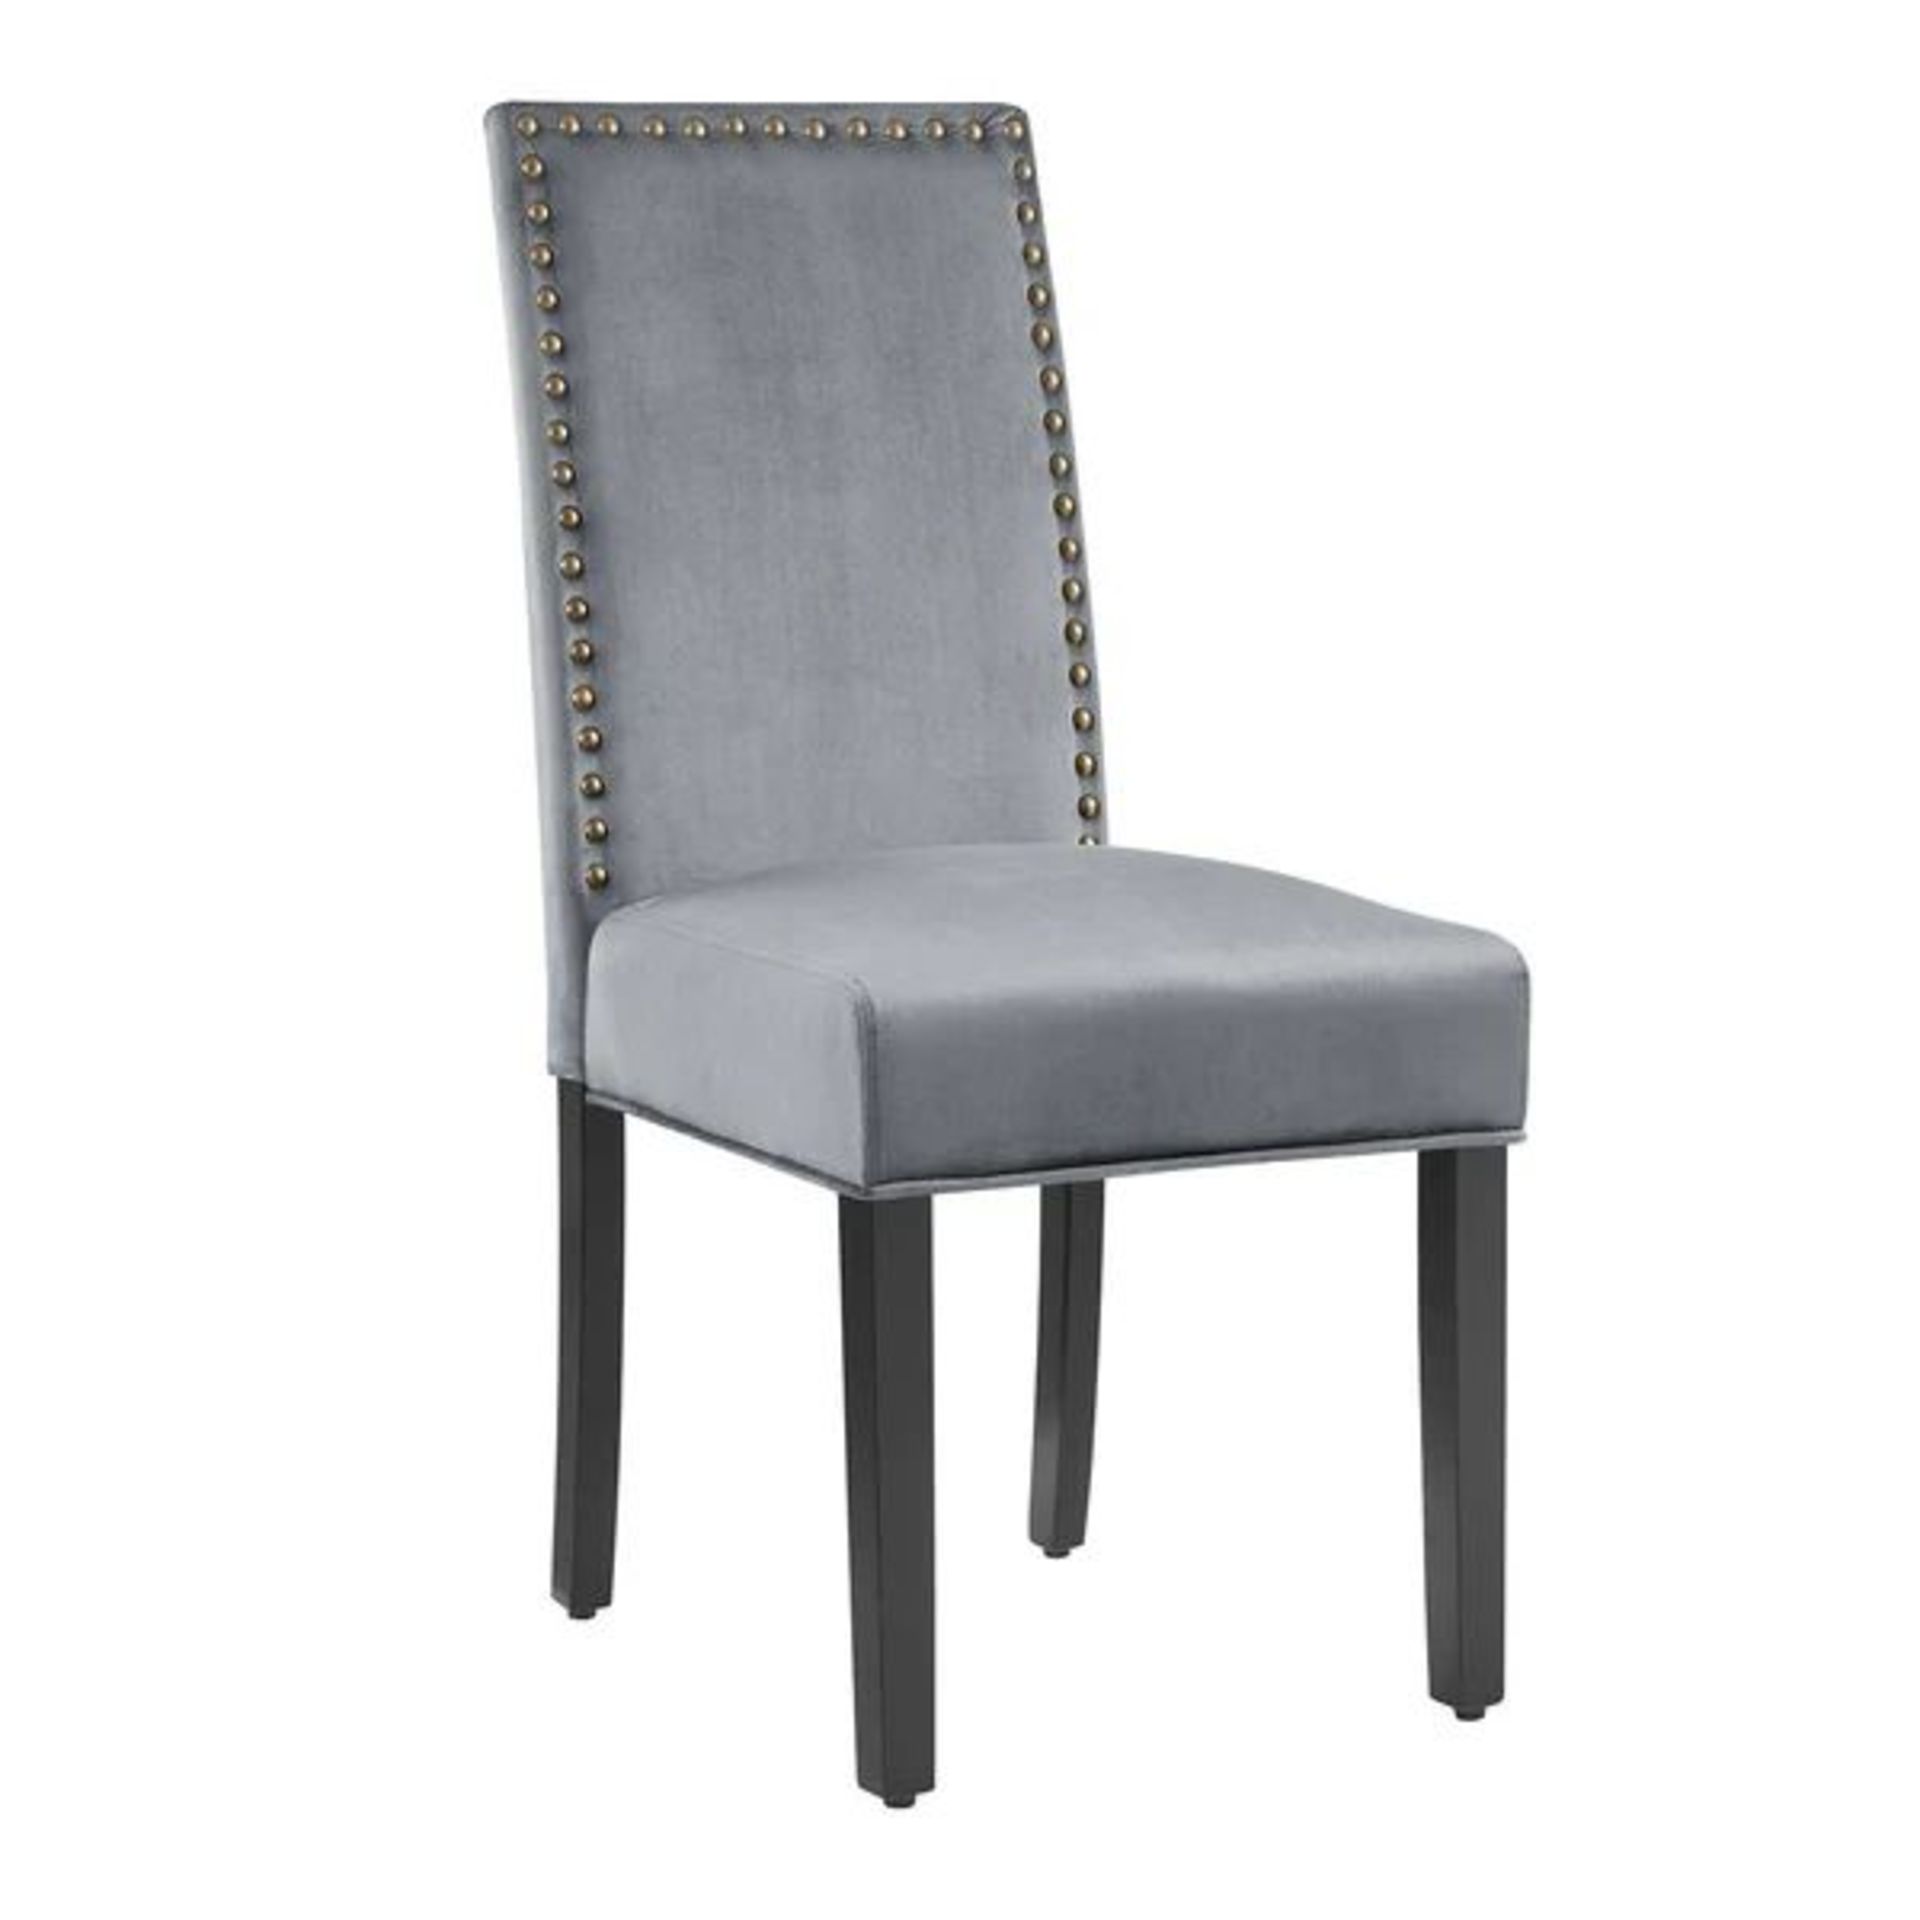 Maidwell Set of 2 Grey Velvet Dining Chairs. - R14. RRP £199.99. With a sleek sihoutte, our Maidwell - Image 2 of 2